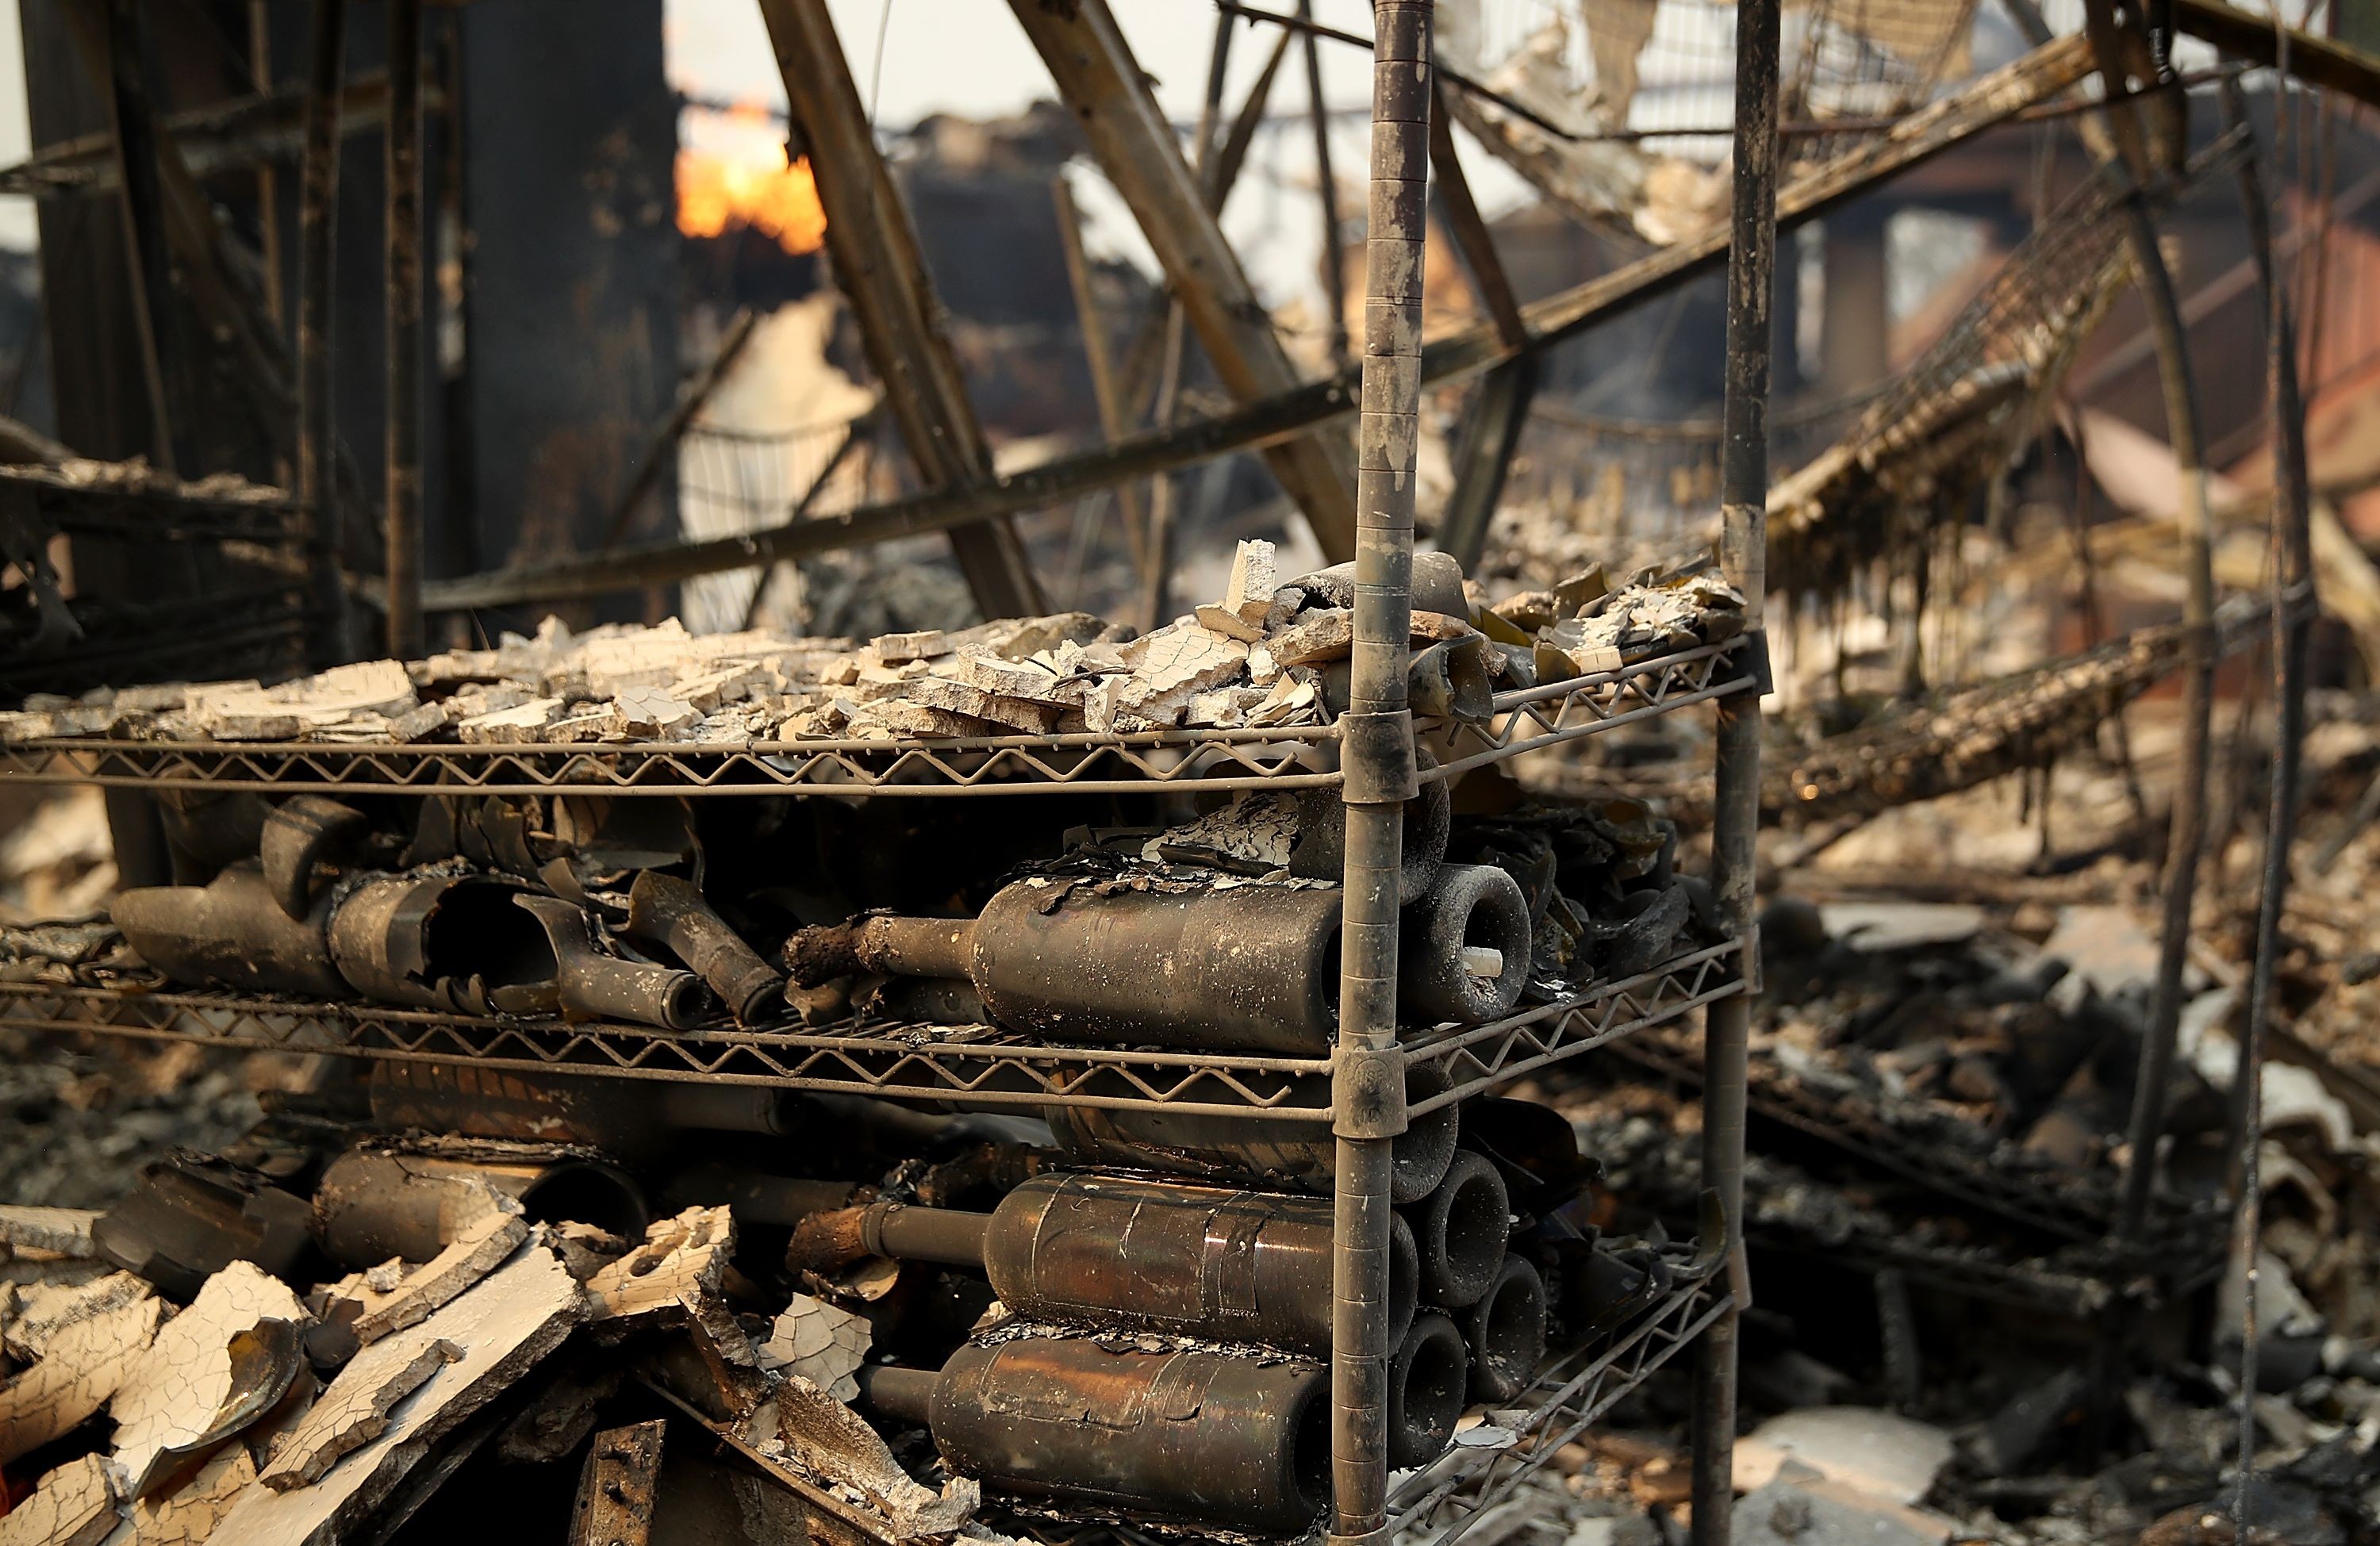 Flames destroy wineries in Sonoma, Napa and Mendocino counties, and with wildfires still raging, seller of Californian wine in Hong Kong warns imports could drop; industry figures on the ground hopeful supply won’t take a big hit